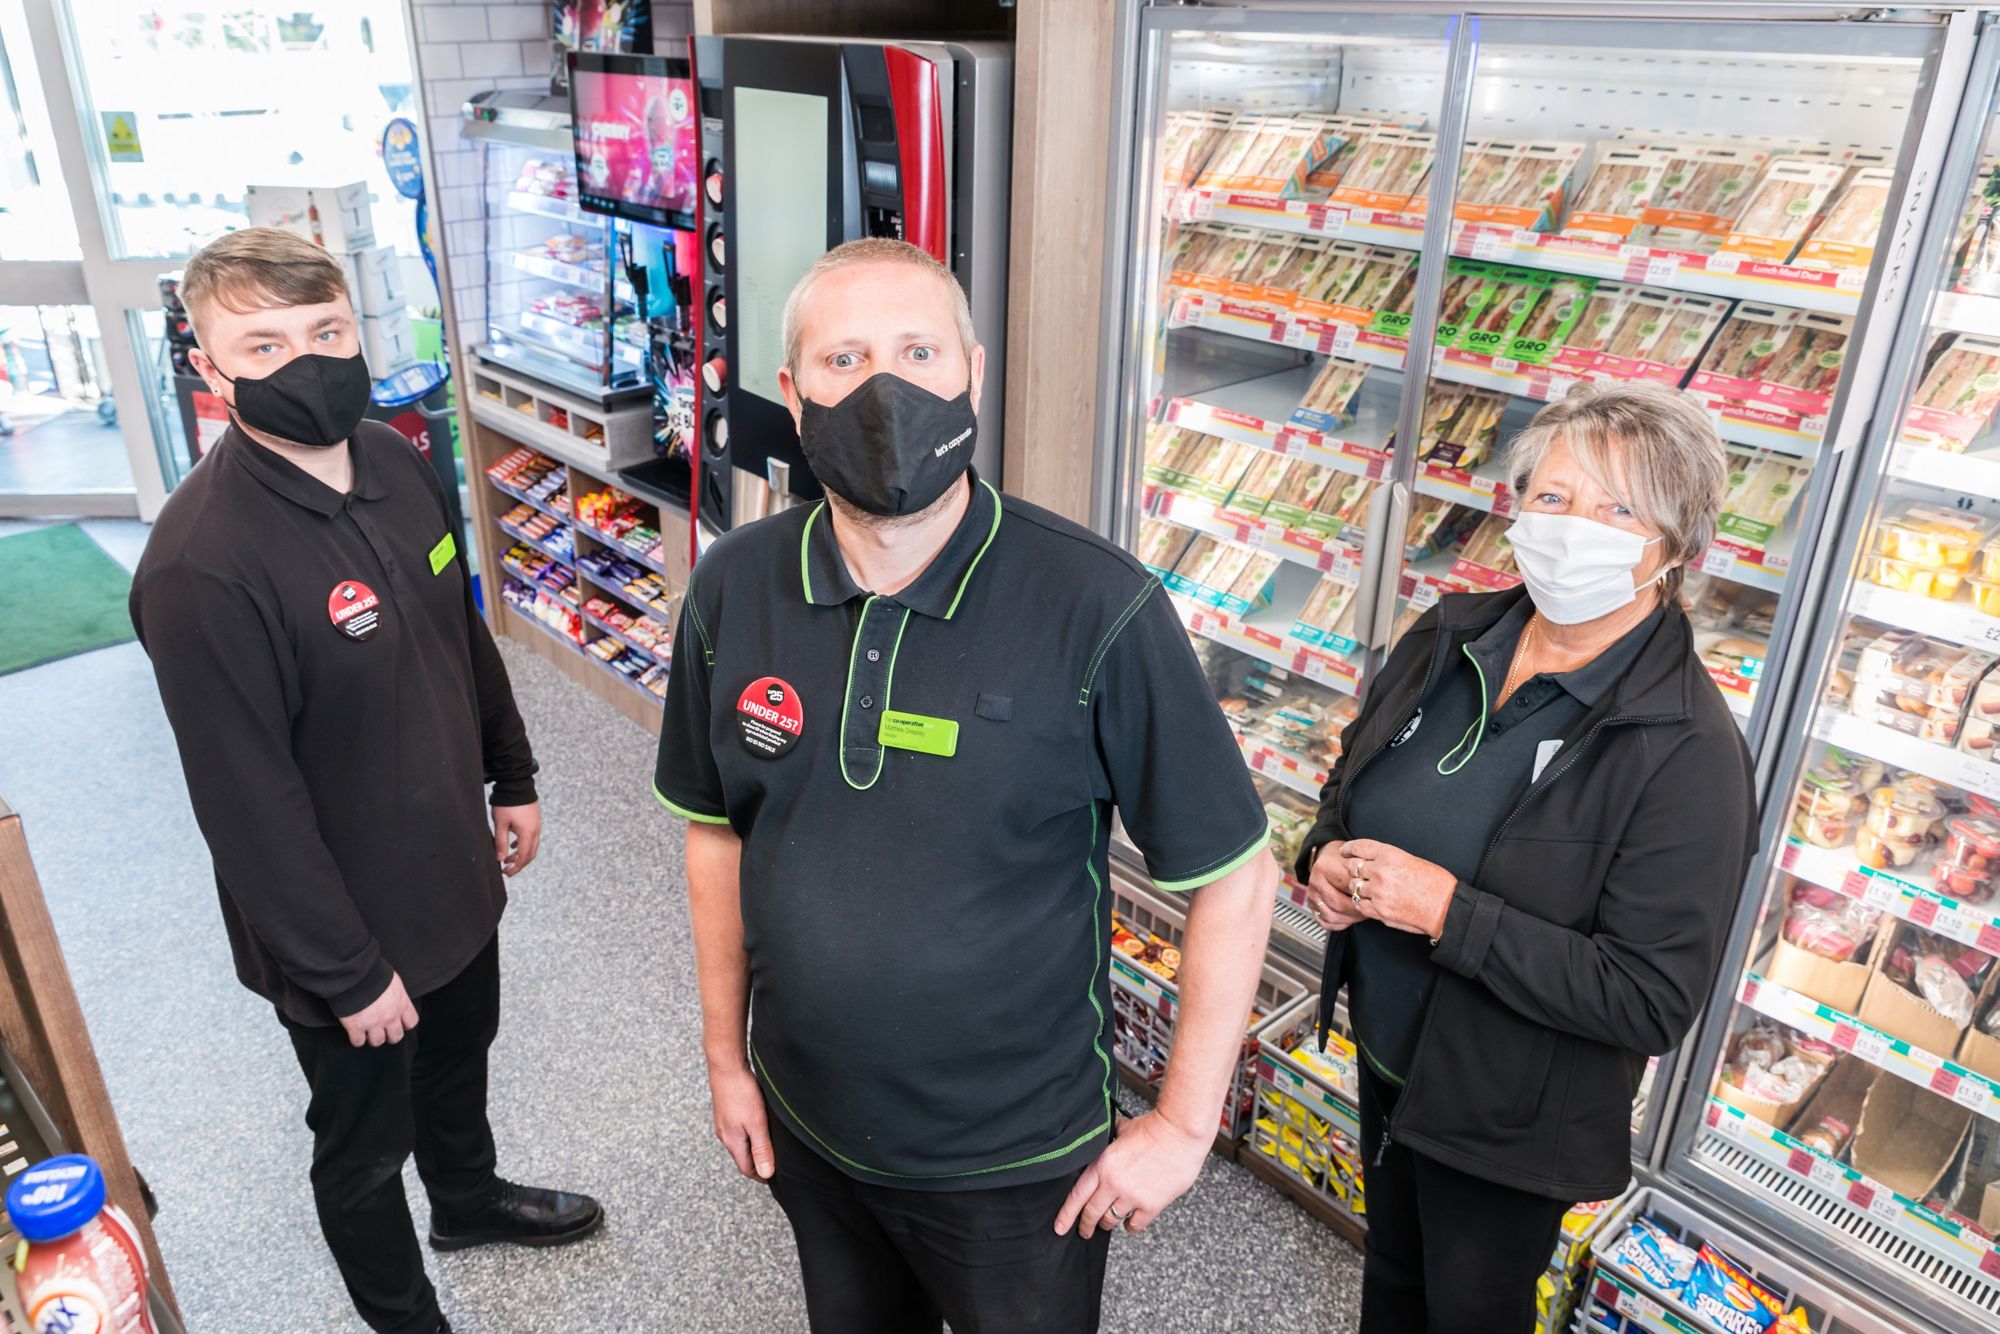 Two community food stores in Leicester and Nottinghamshire receive makeovers